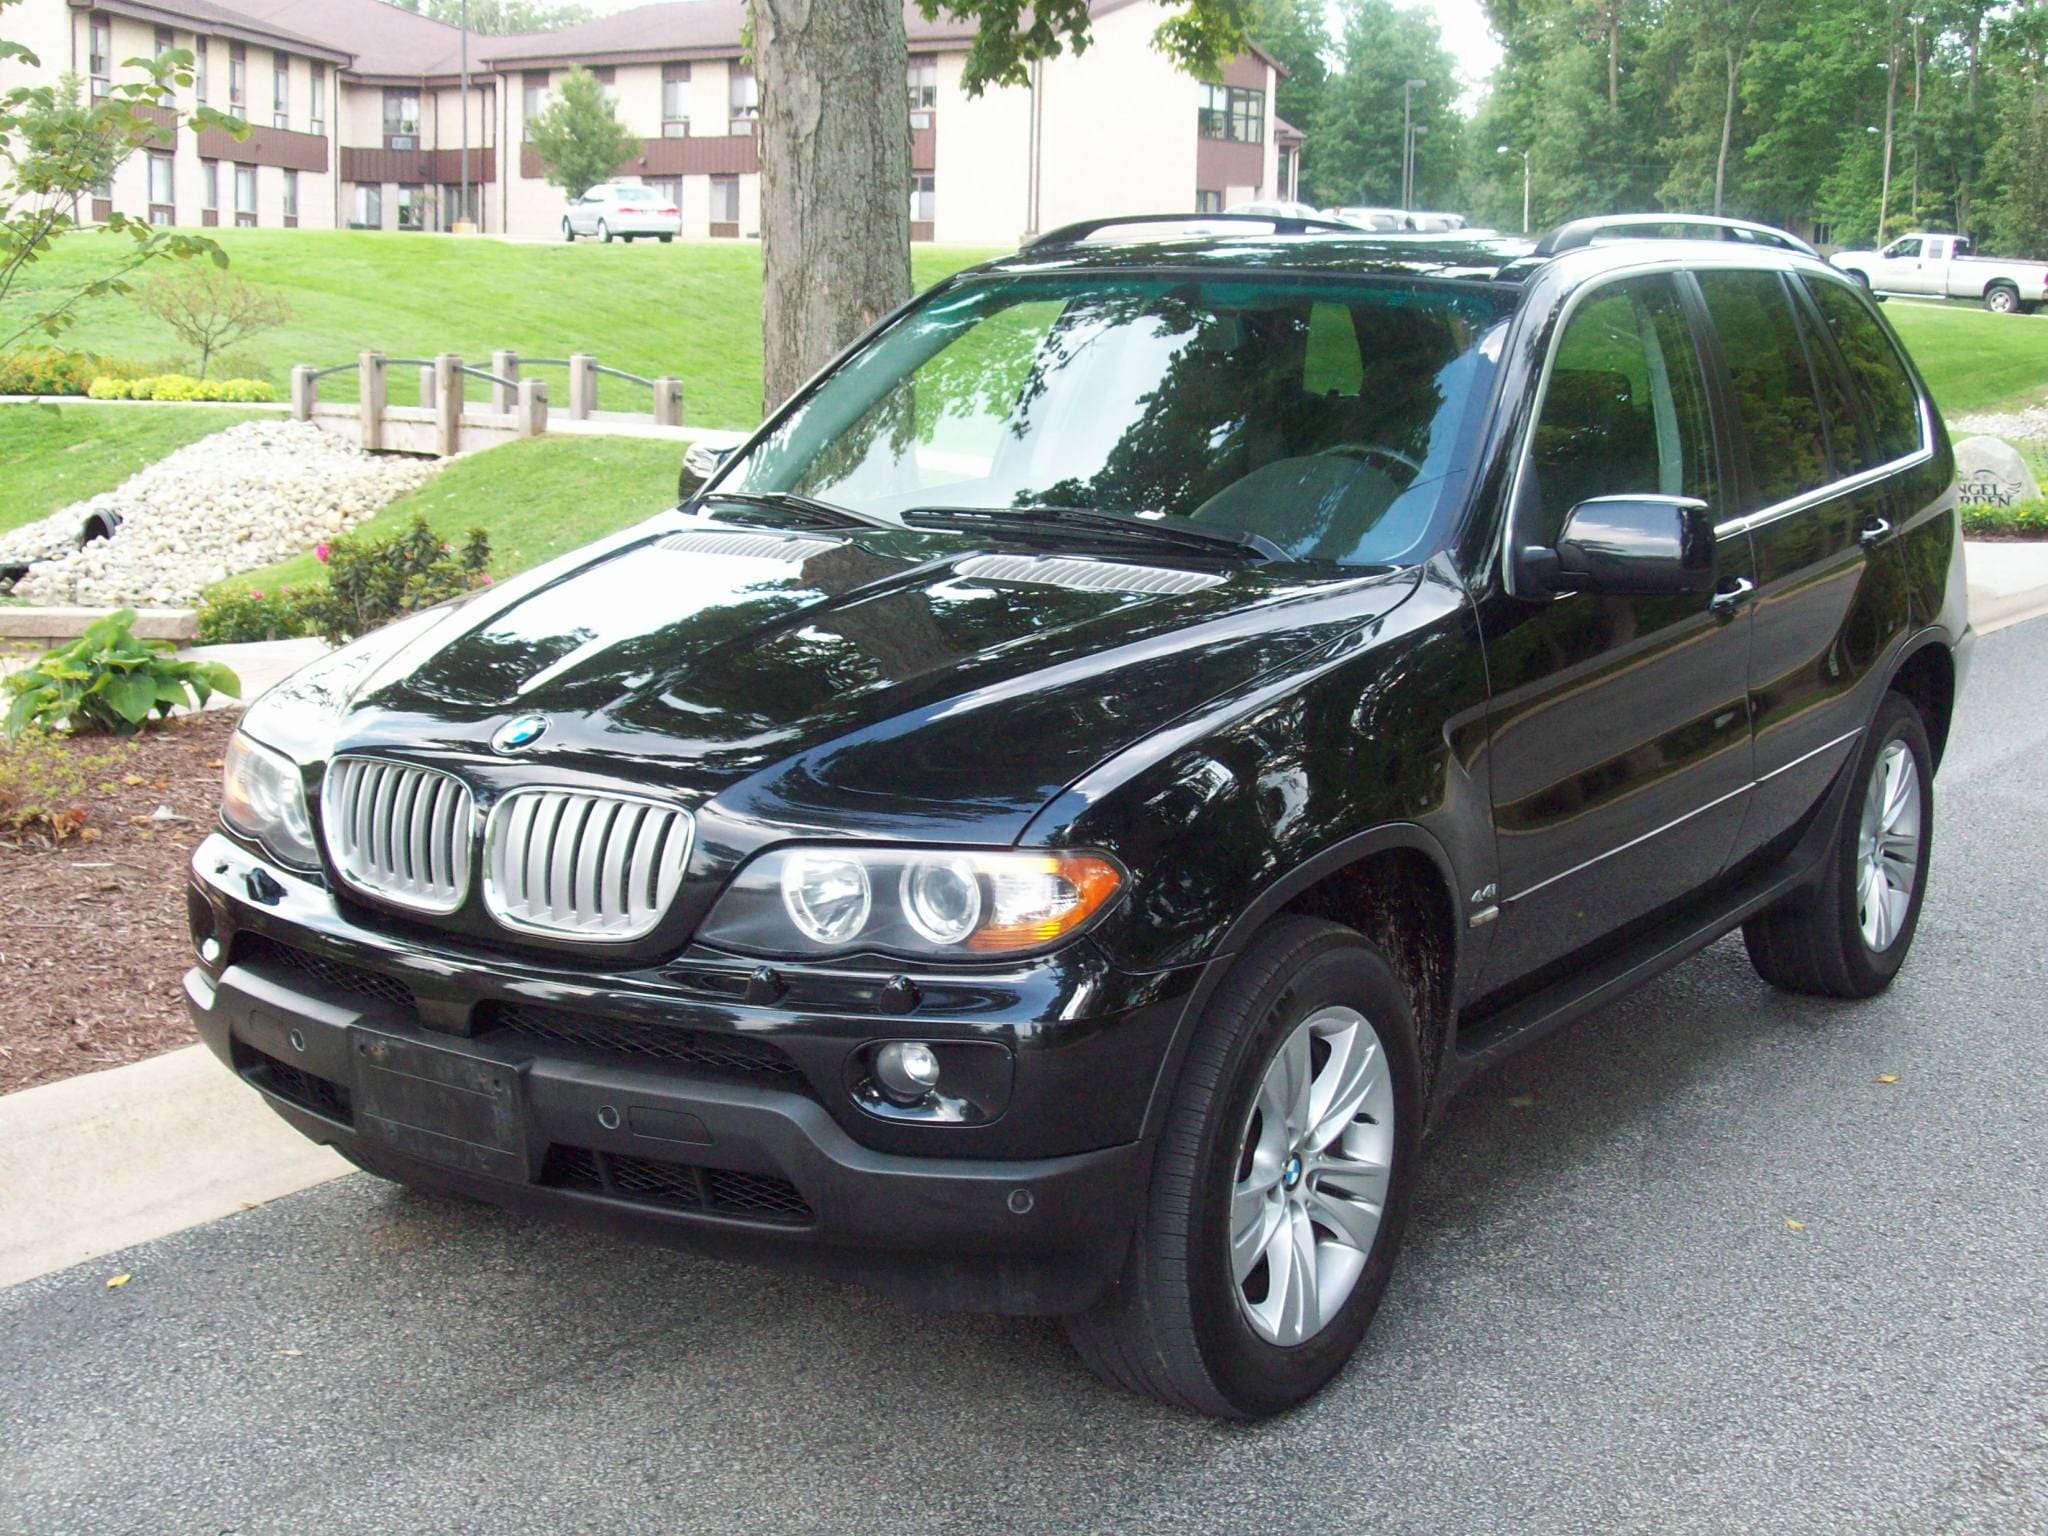 2002 Bmw x5 issues #4